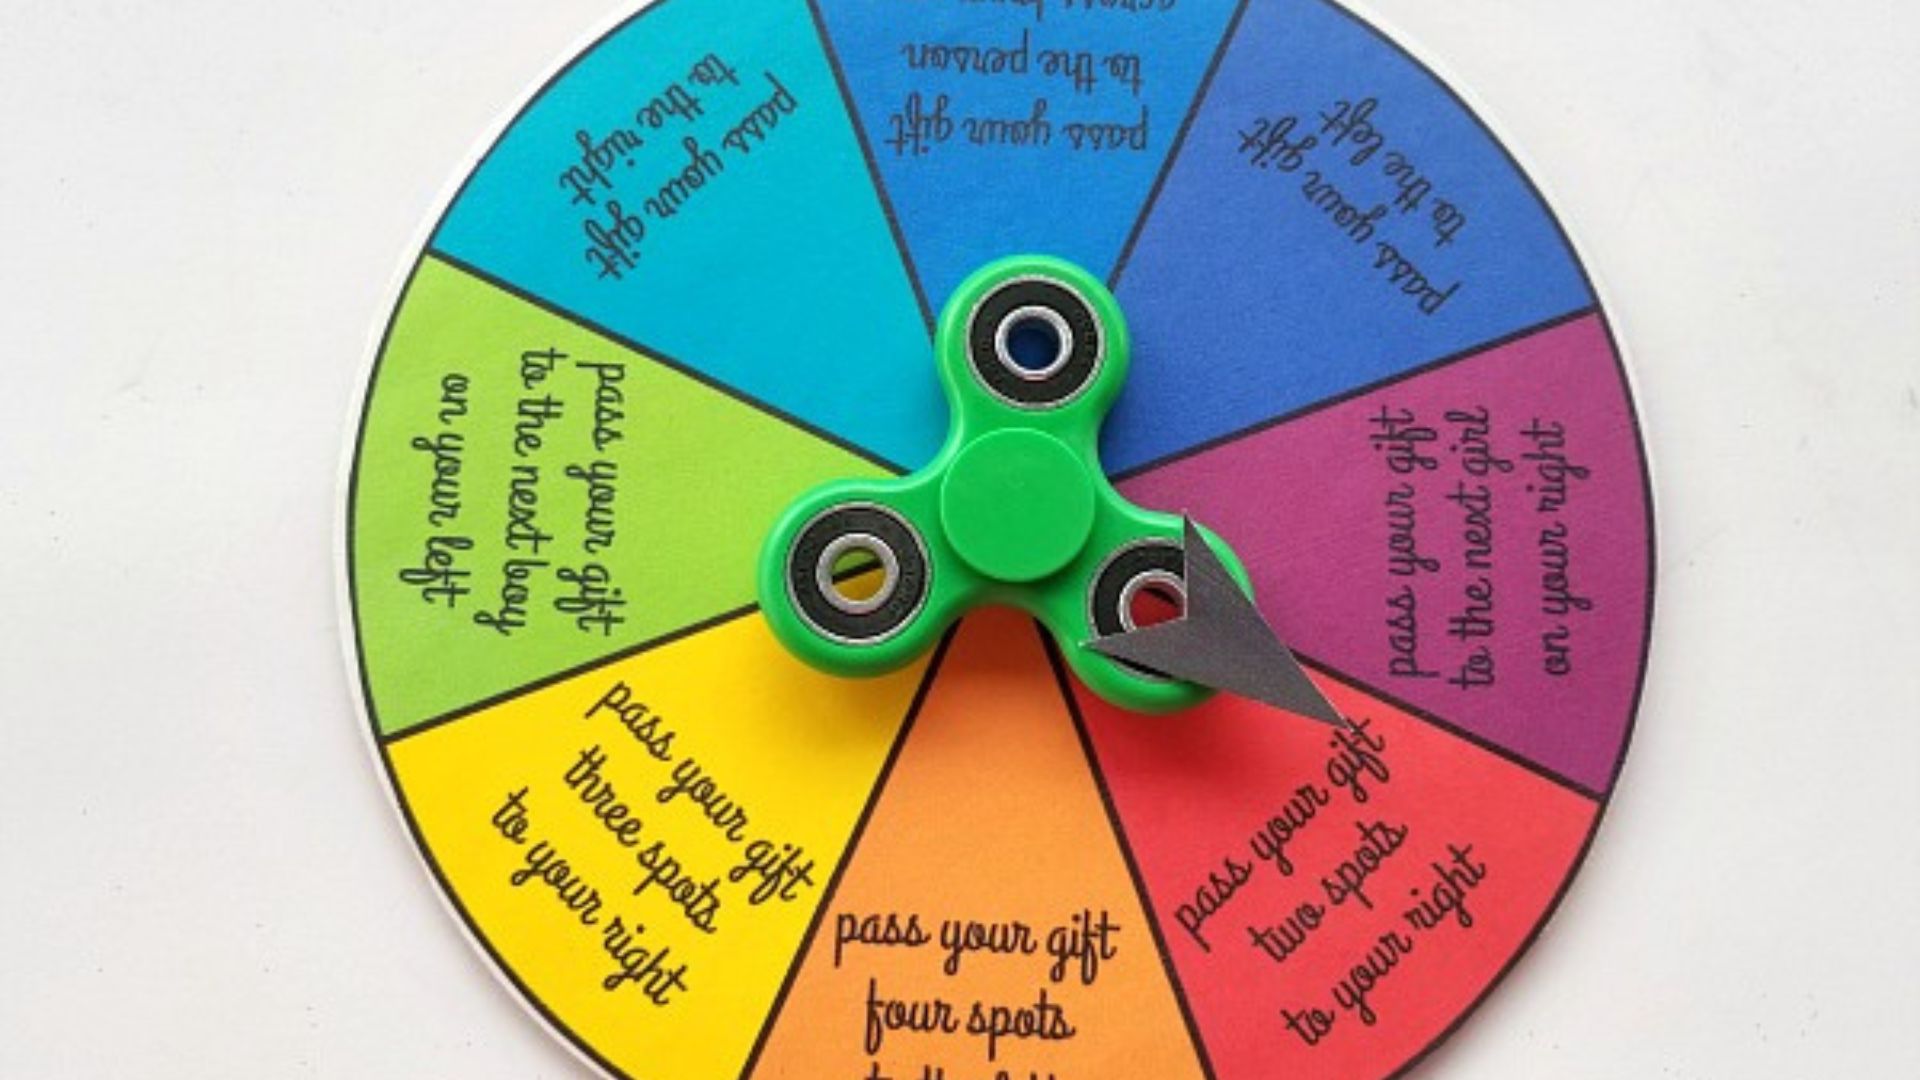 this image shows Spin Wheel Themes for Seasonal Promotions